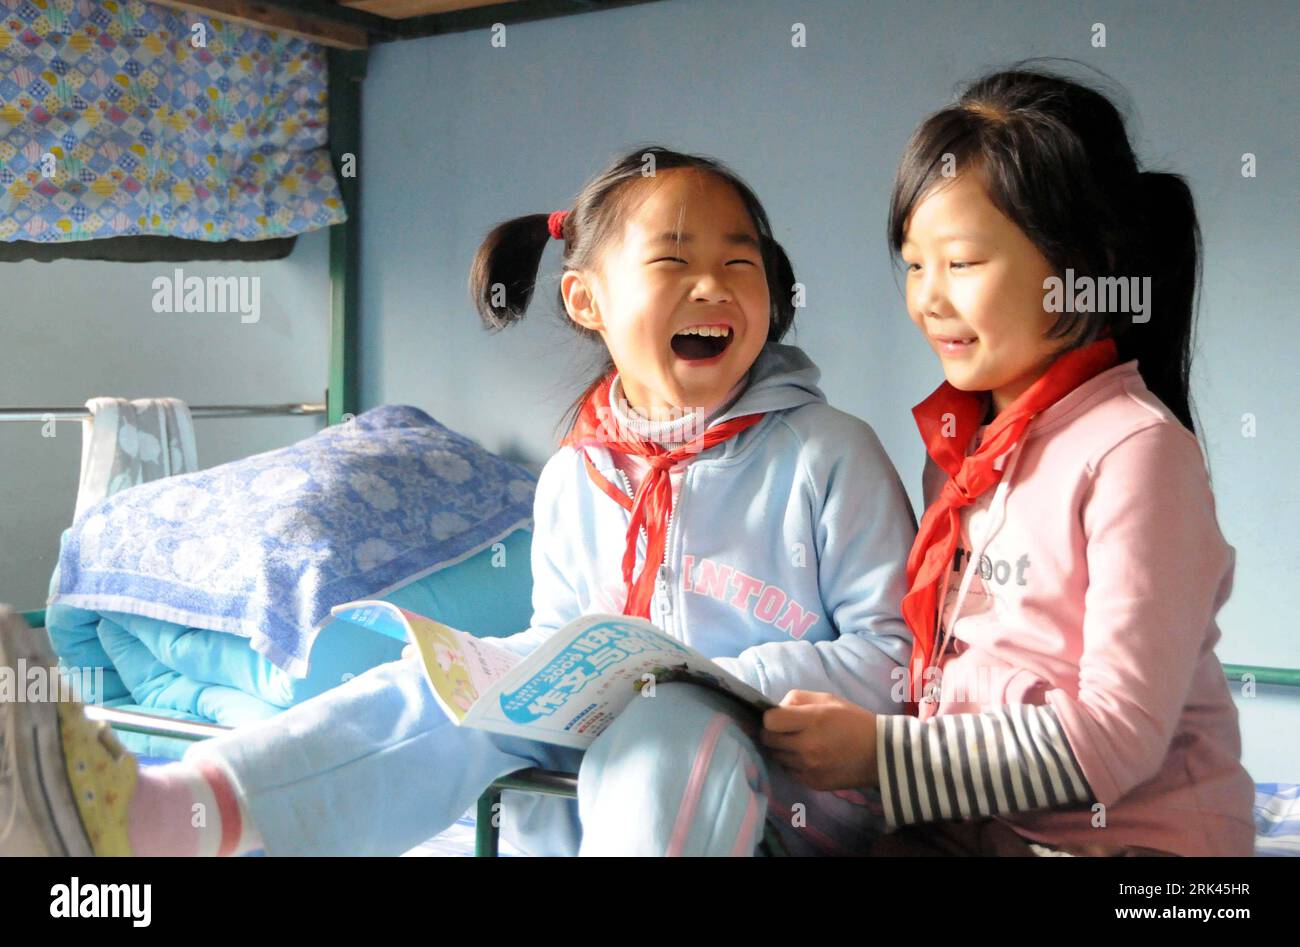 Bildnummer: 53588553  Datum: 29.10.2009  Copyright: imago/Xinhua  Fuqing (L), the eldest child of quintuplets children of Jiao Baocun and his wife Wang Cuiying, chats with her classmate in her dormitory at Experimental Primary School of Fengtai District in Beijing on Oct. 29, 2009. Wang, from Zhenshang Village, four hours bus ride from Shijiazhuang, provincial capital of Hebei, became well-known nationwide for giving birth to five children, two boys and three girls, via Caesarean operation in one delivery at Beijing Maternity Hospital on March 4, 2002. A member of Buddhist Association of China Stock Photo